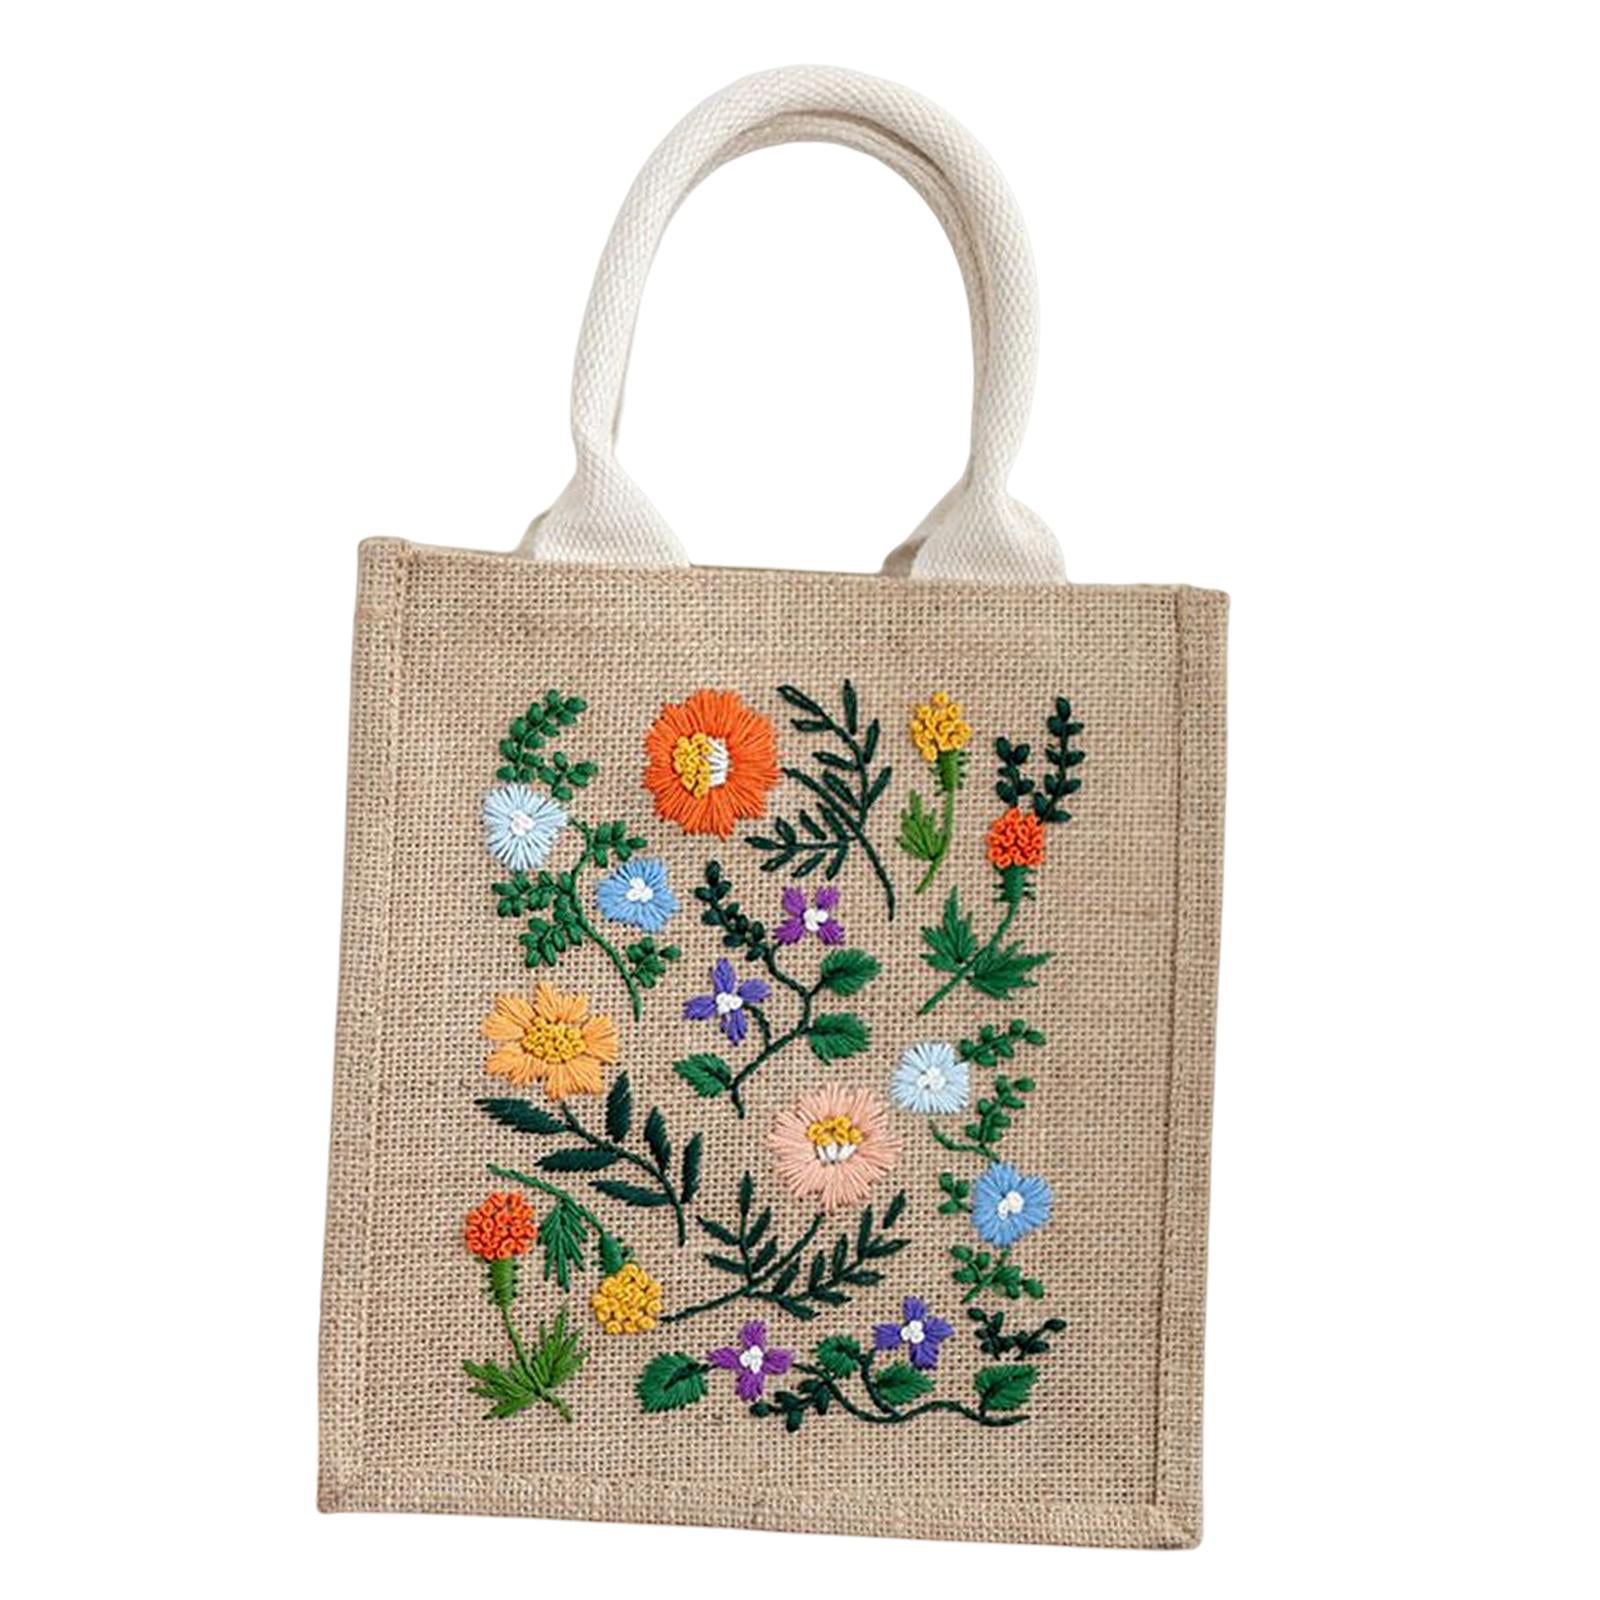 2Pieces DIY Embroidery Bag with Supplies Handmade Craft with Pattern  Needlework Girls Gift Cross Handmade Tote Bag Handbag for Adults 